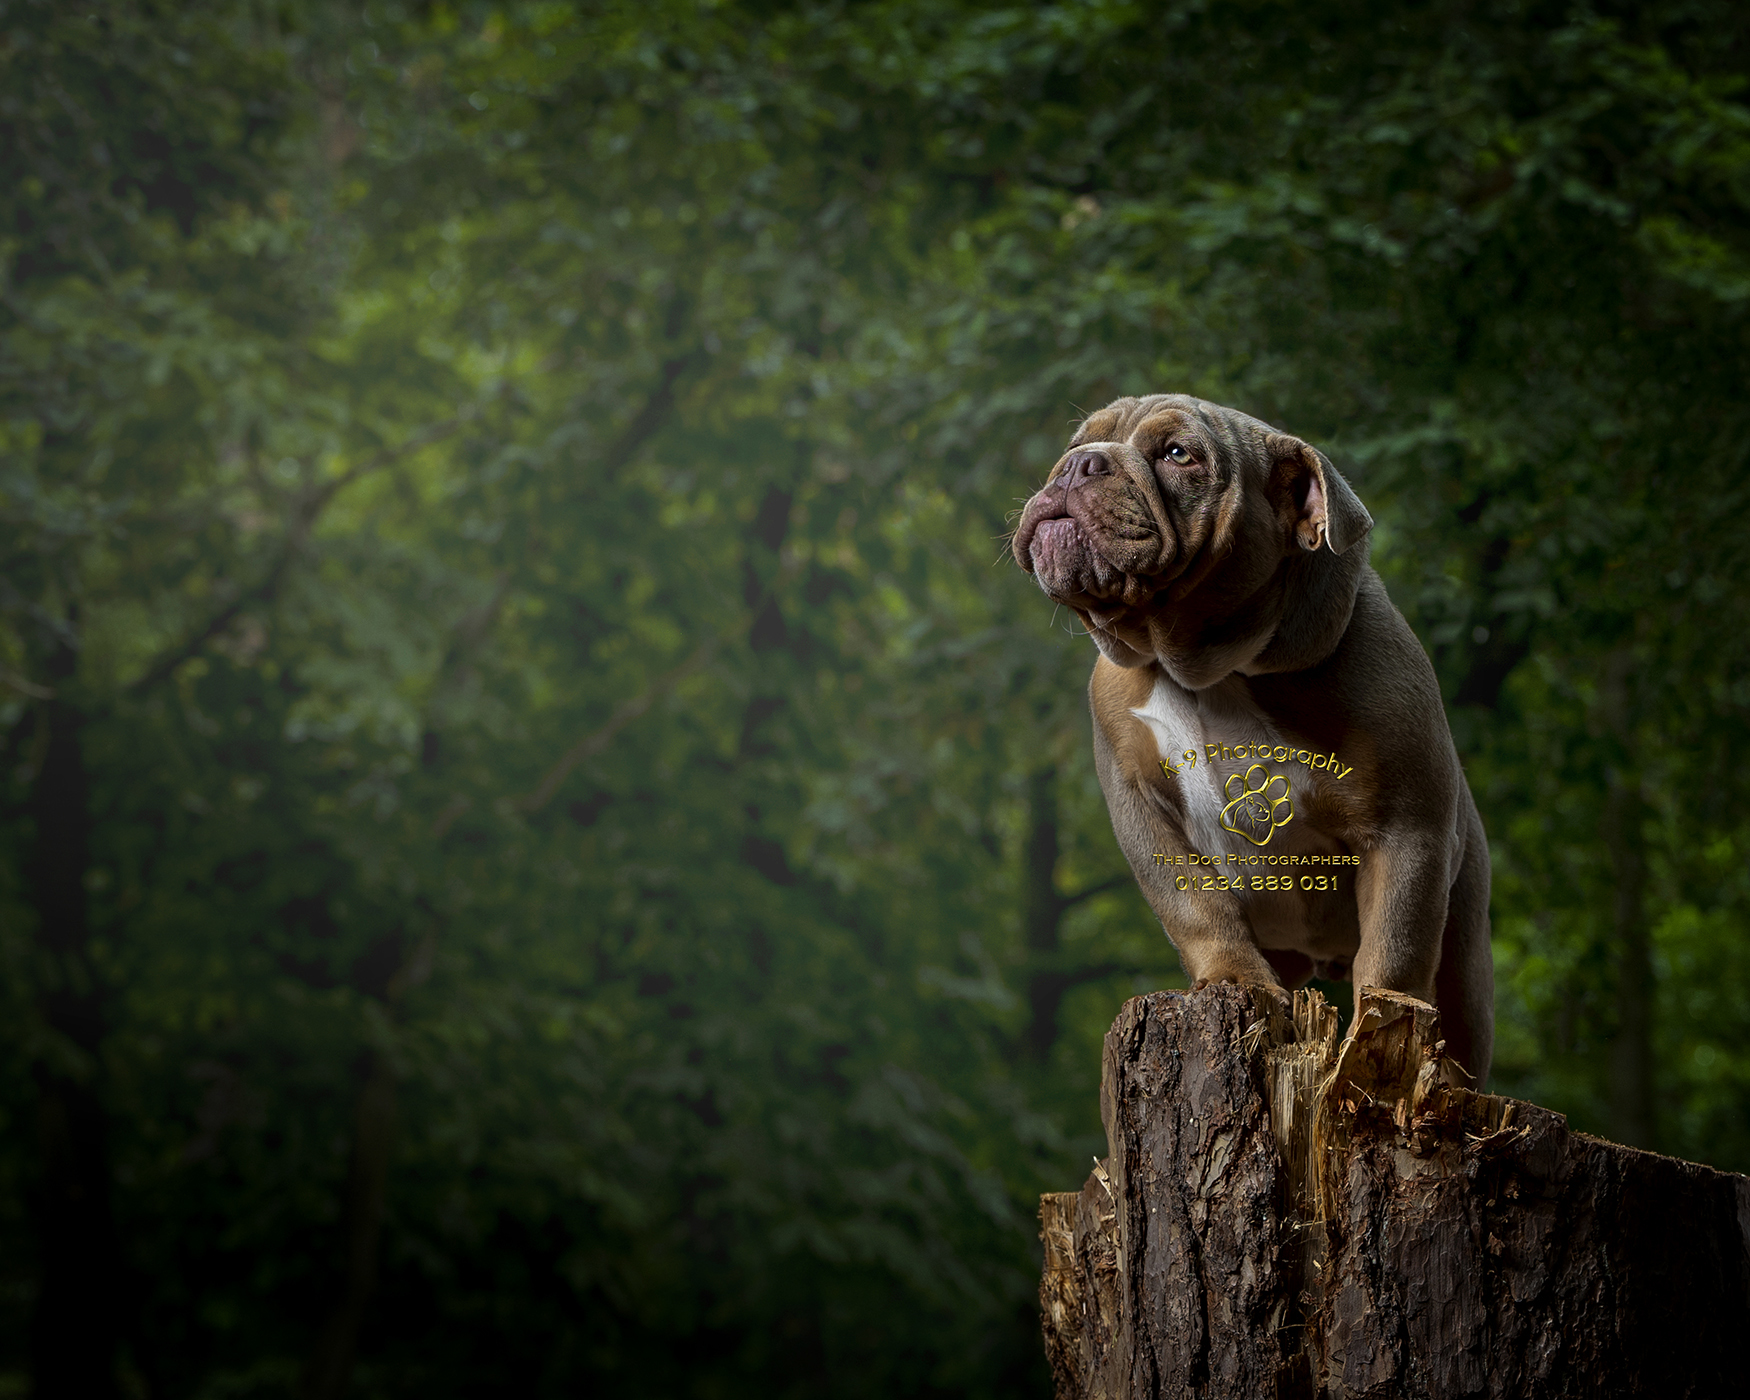 Photography hacks for better dog portraits